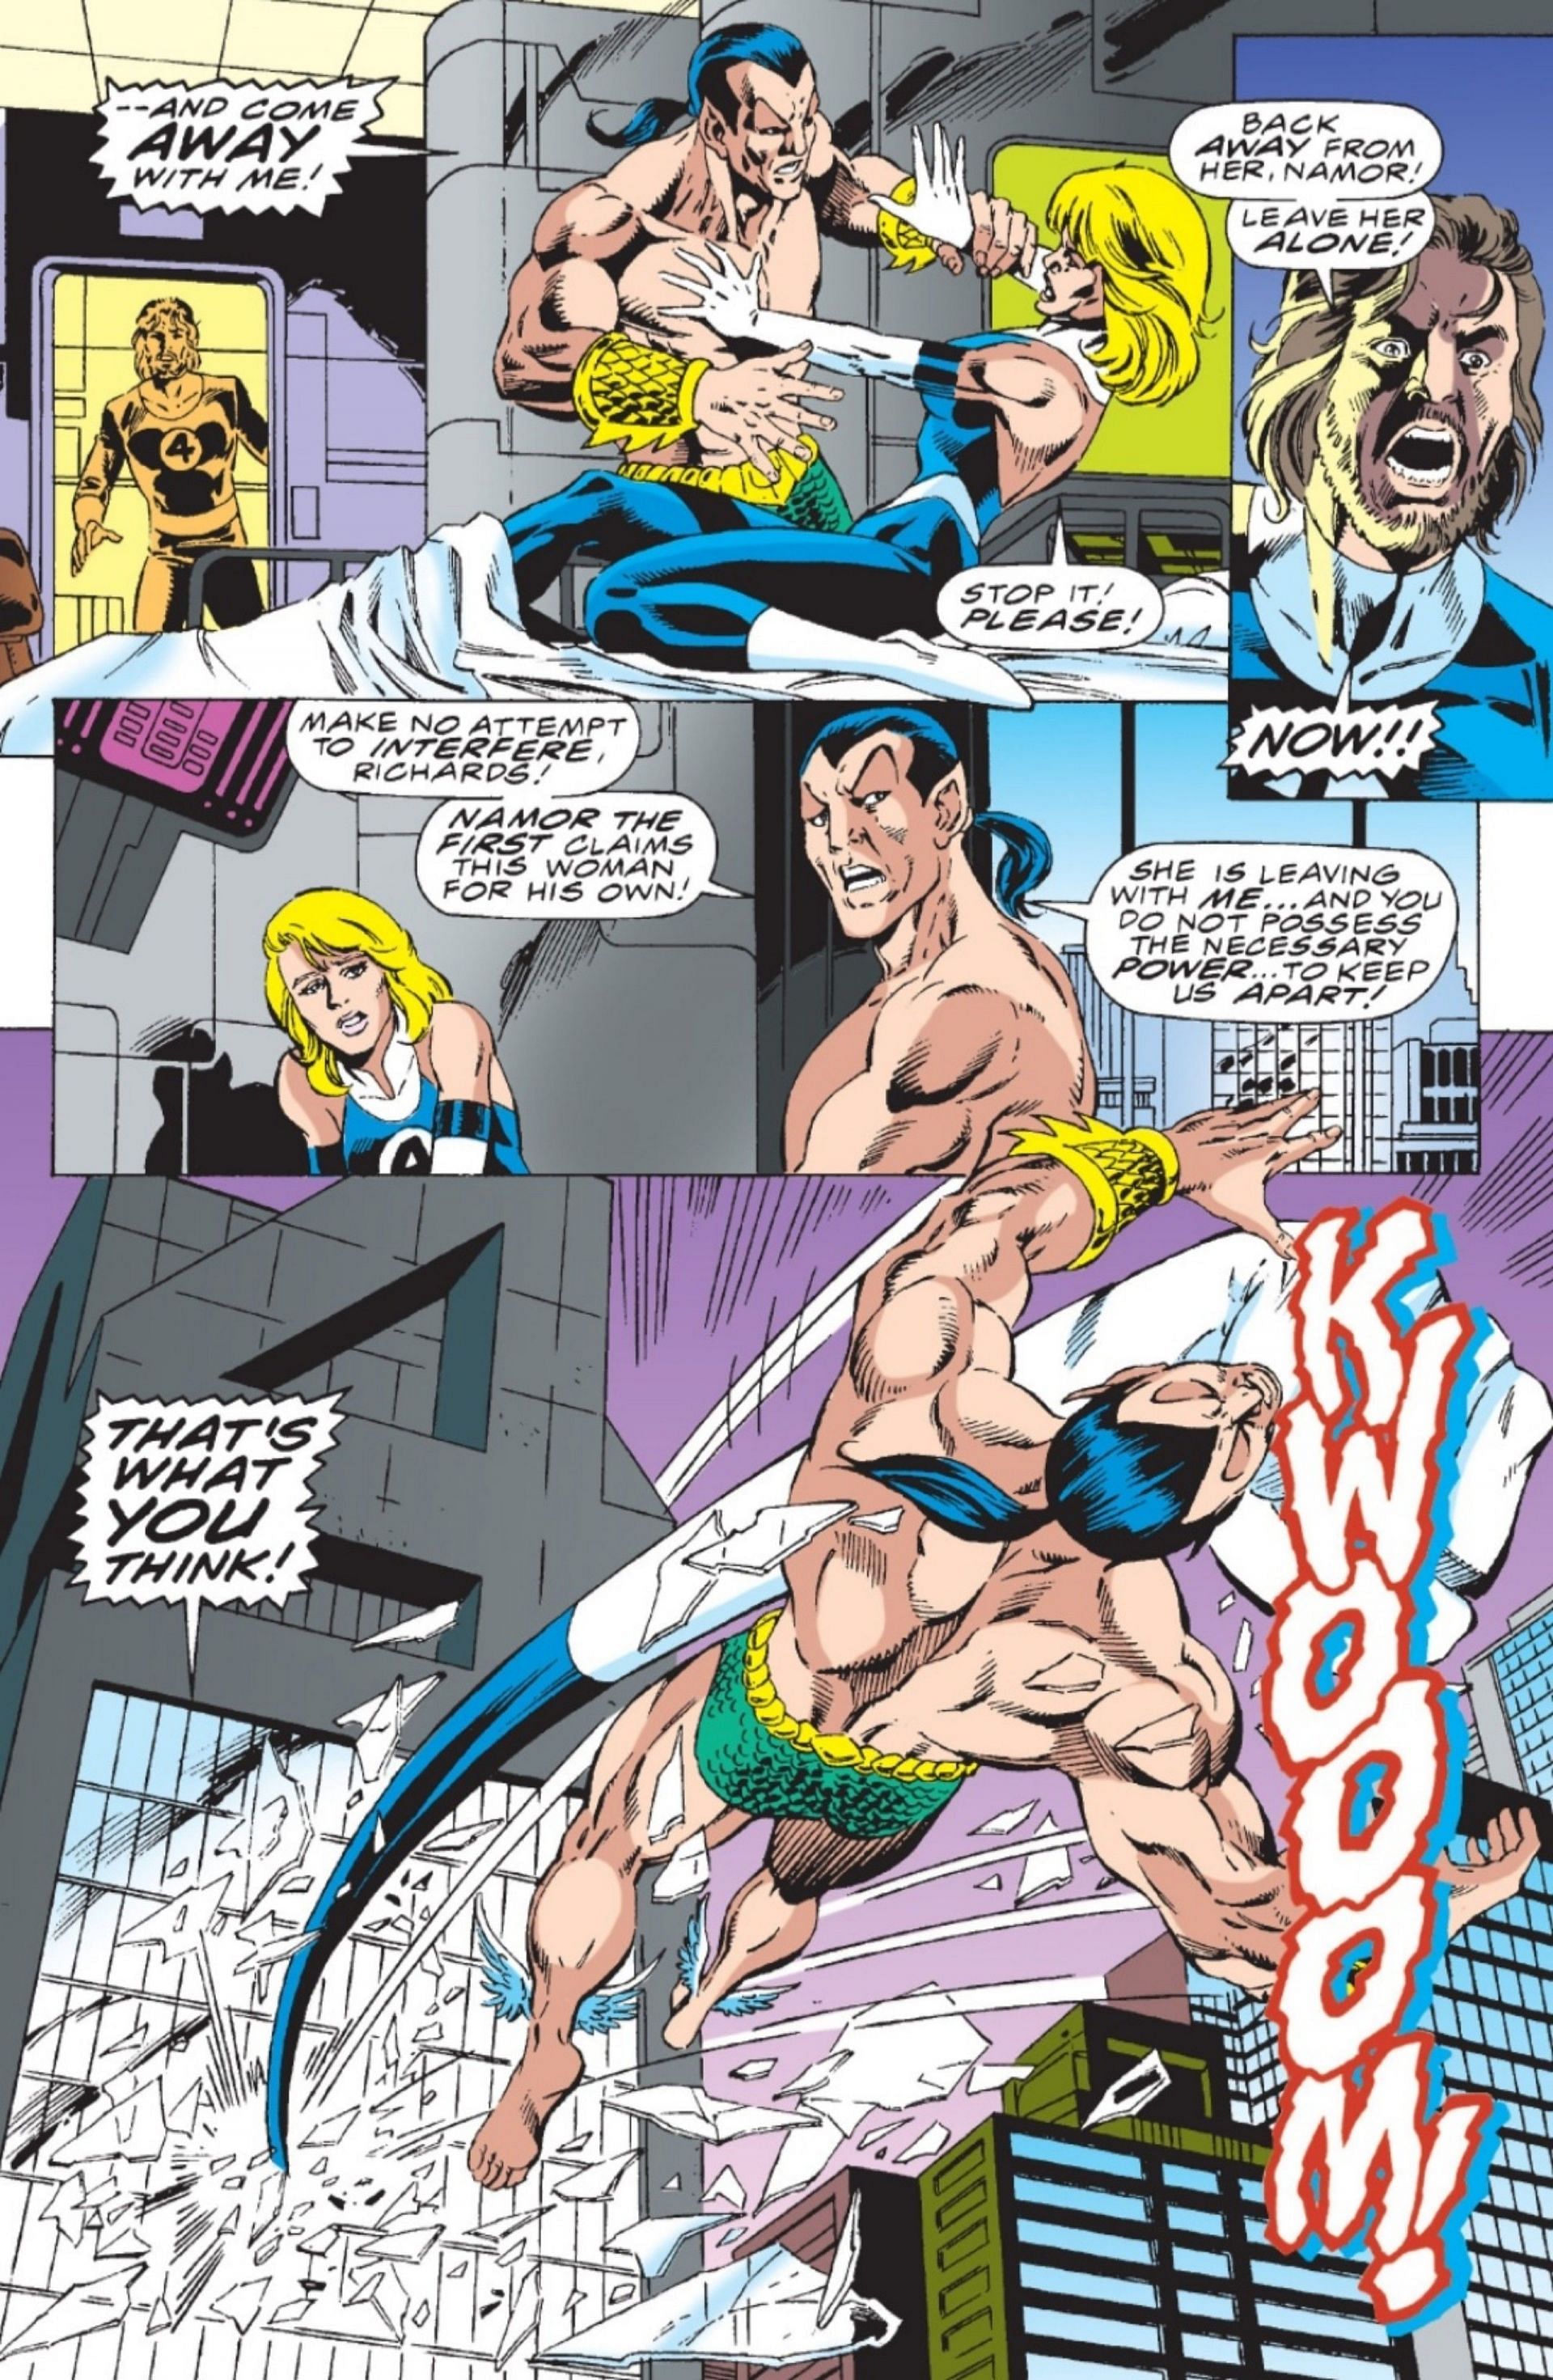 Reed Richards punches Namor out of a window (Image via Marvel Comics)